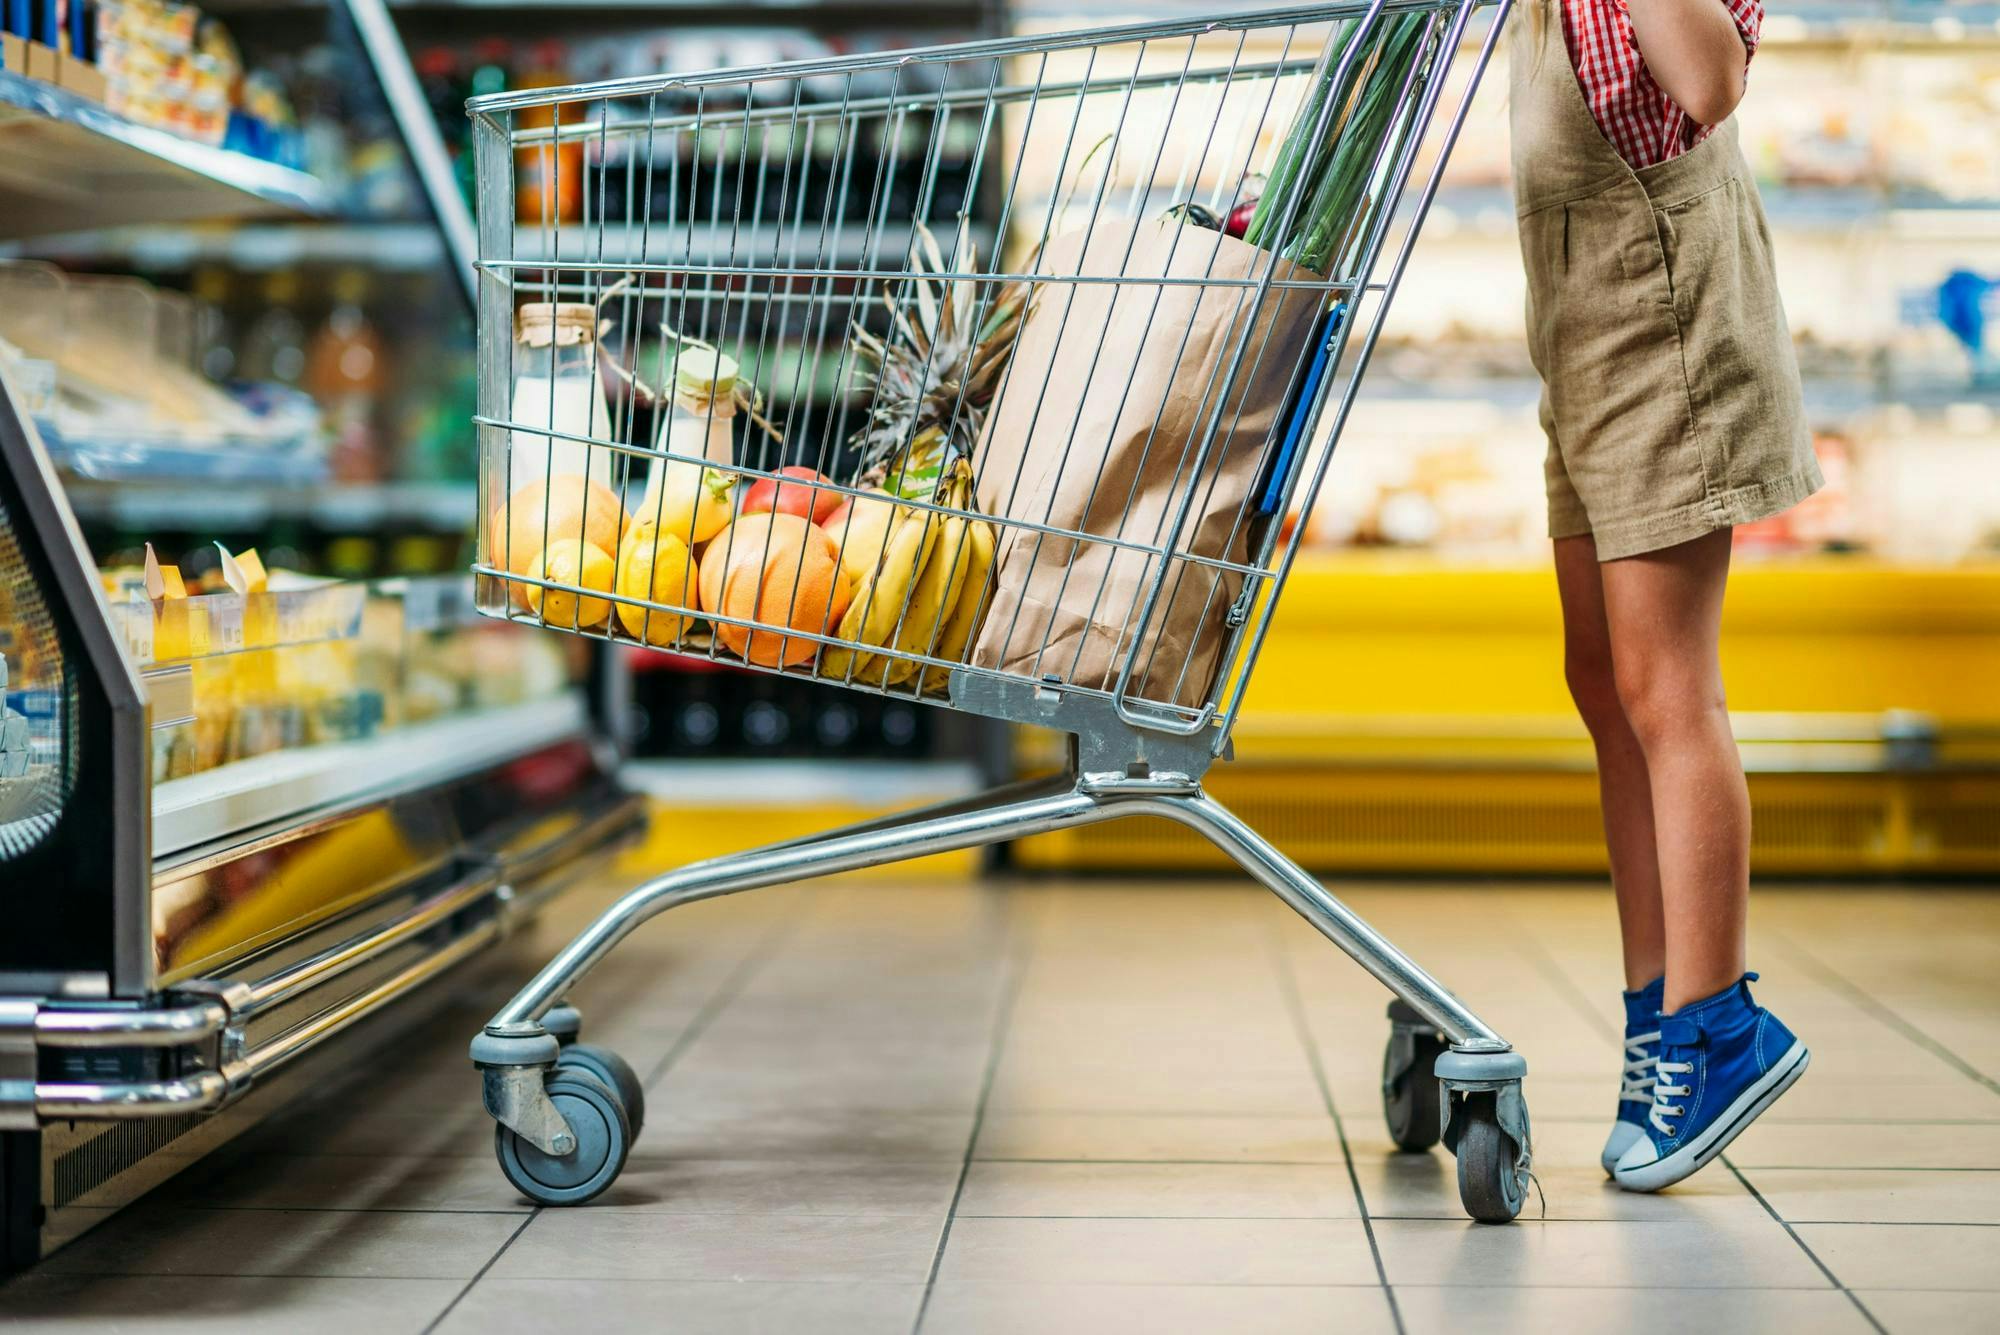 A shopping cart filled with groceries, including fruits and a paper bag, is pushed by a child wearing blue sneakers and overalls in a grocery store aisle.